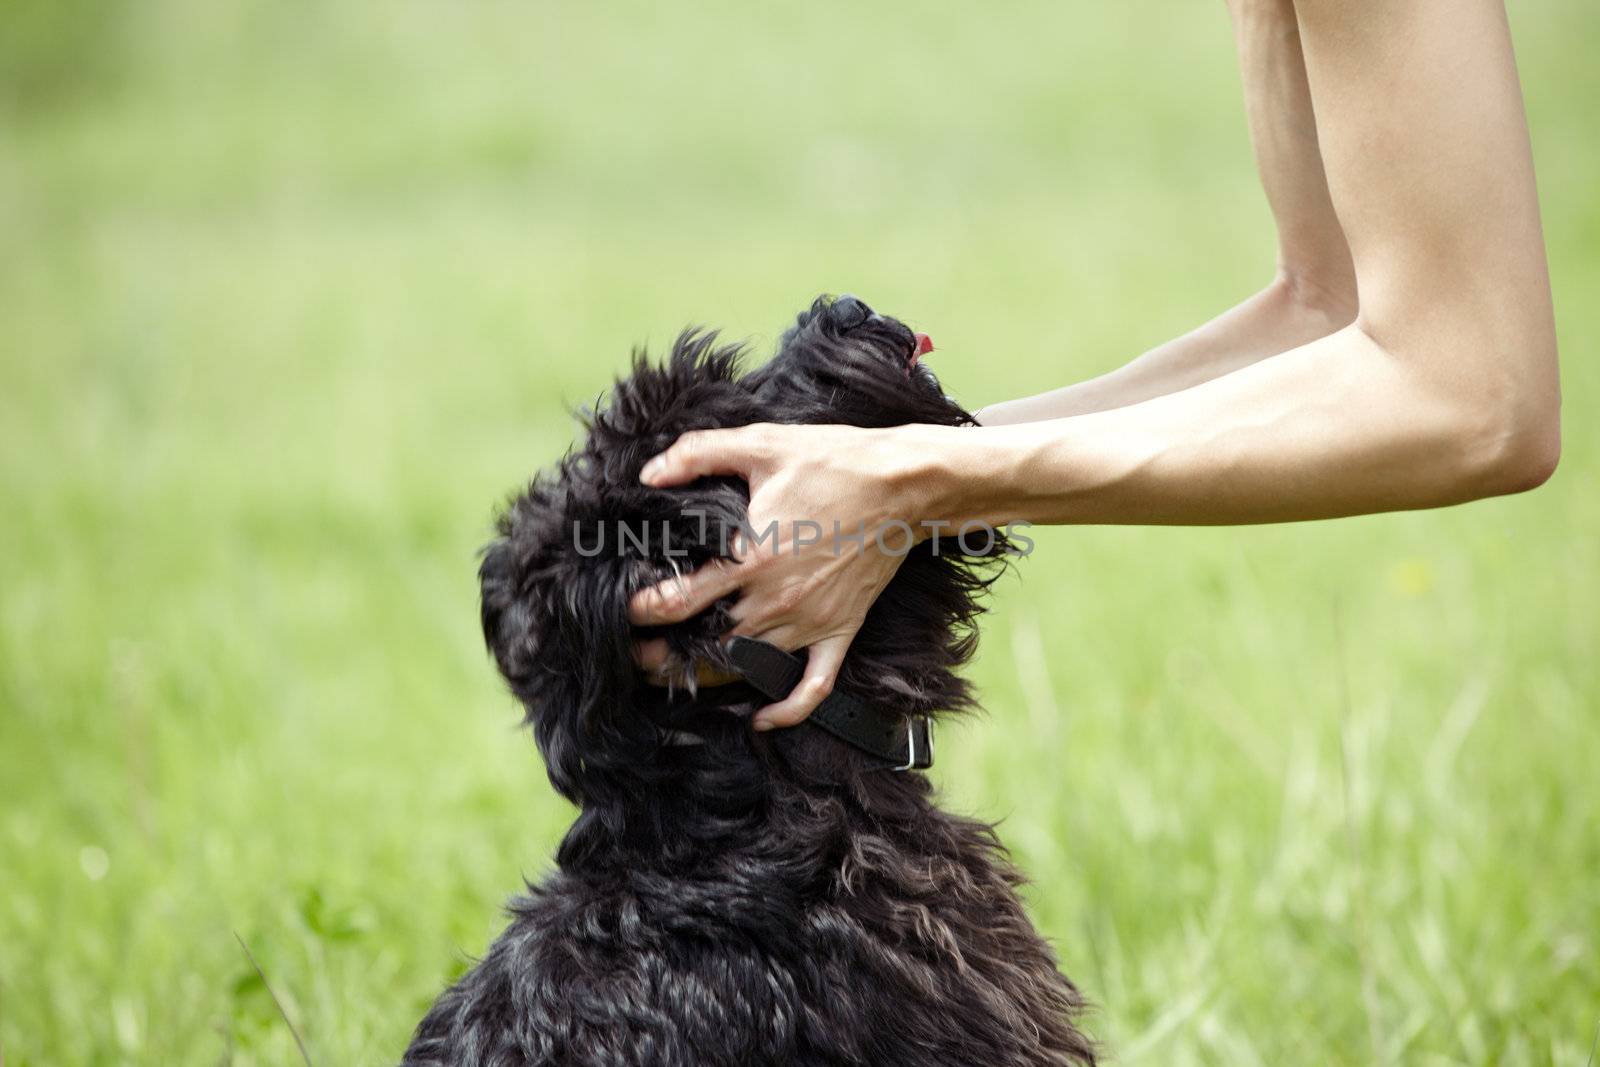 hUman hands holding the muzzle of black miniature schnauzer. Natural light and colors